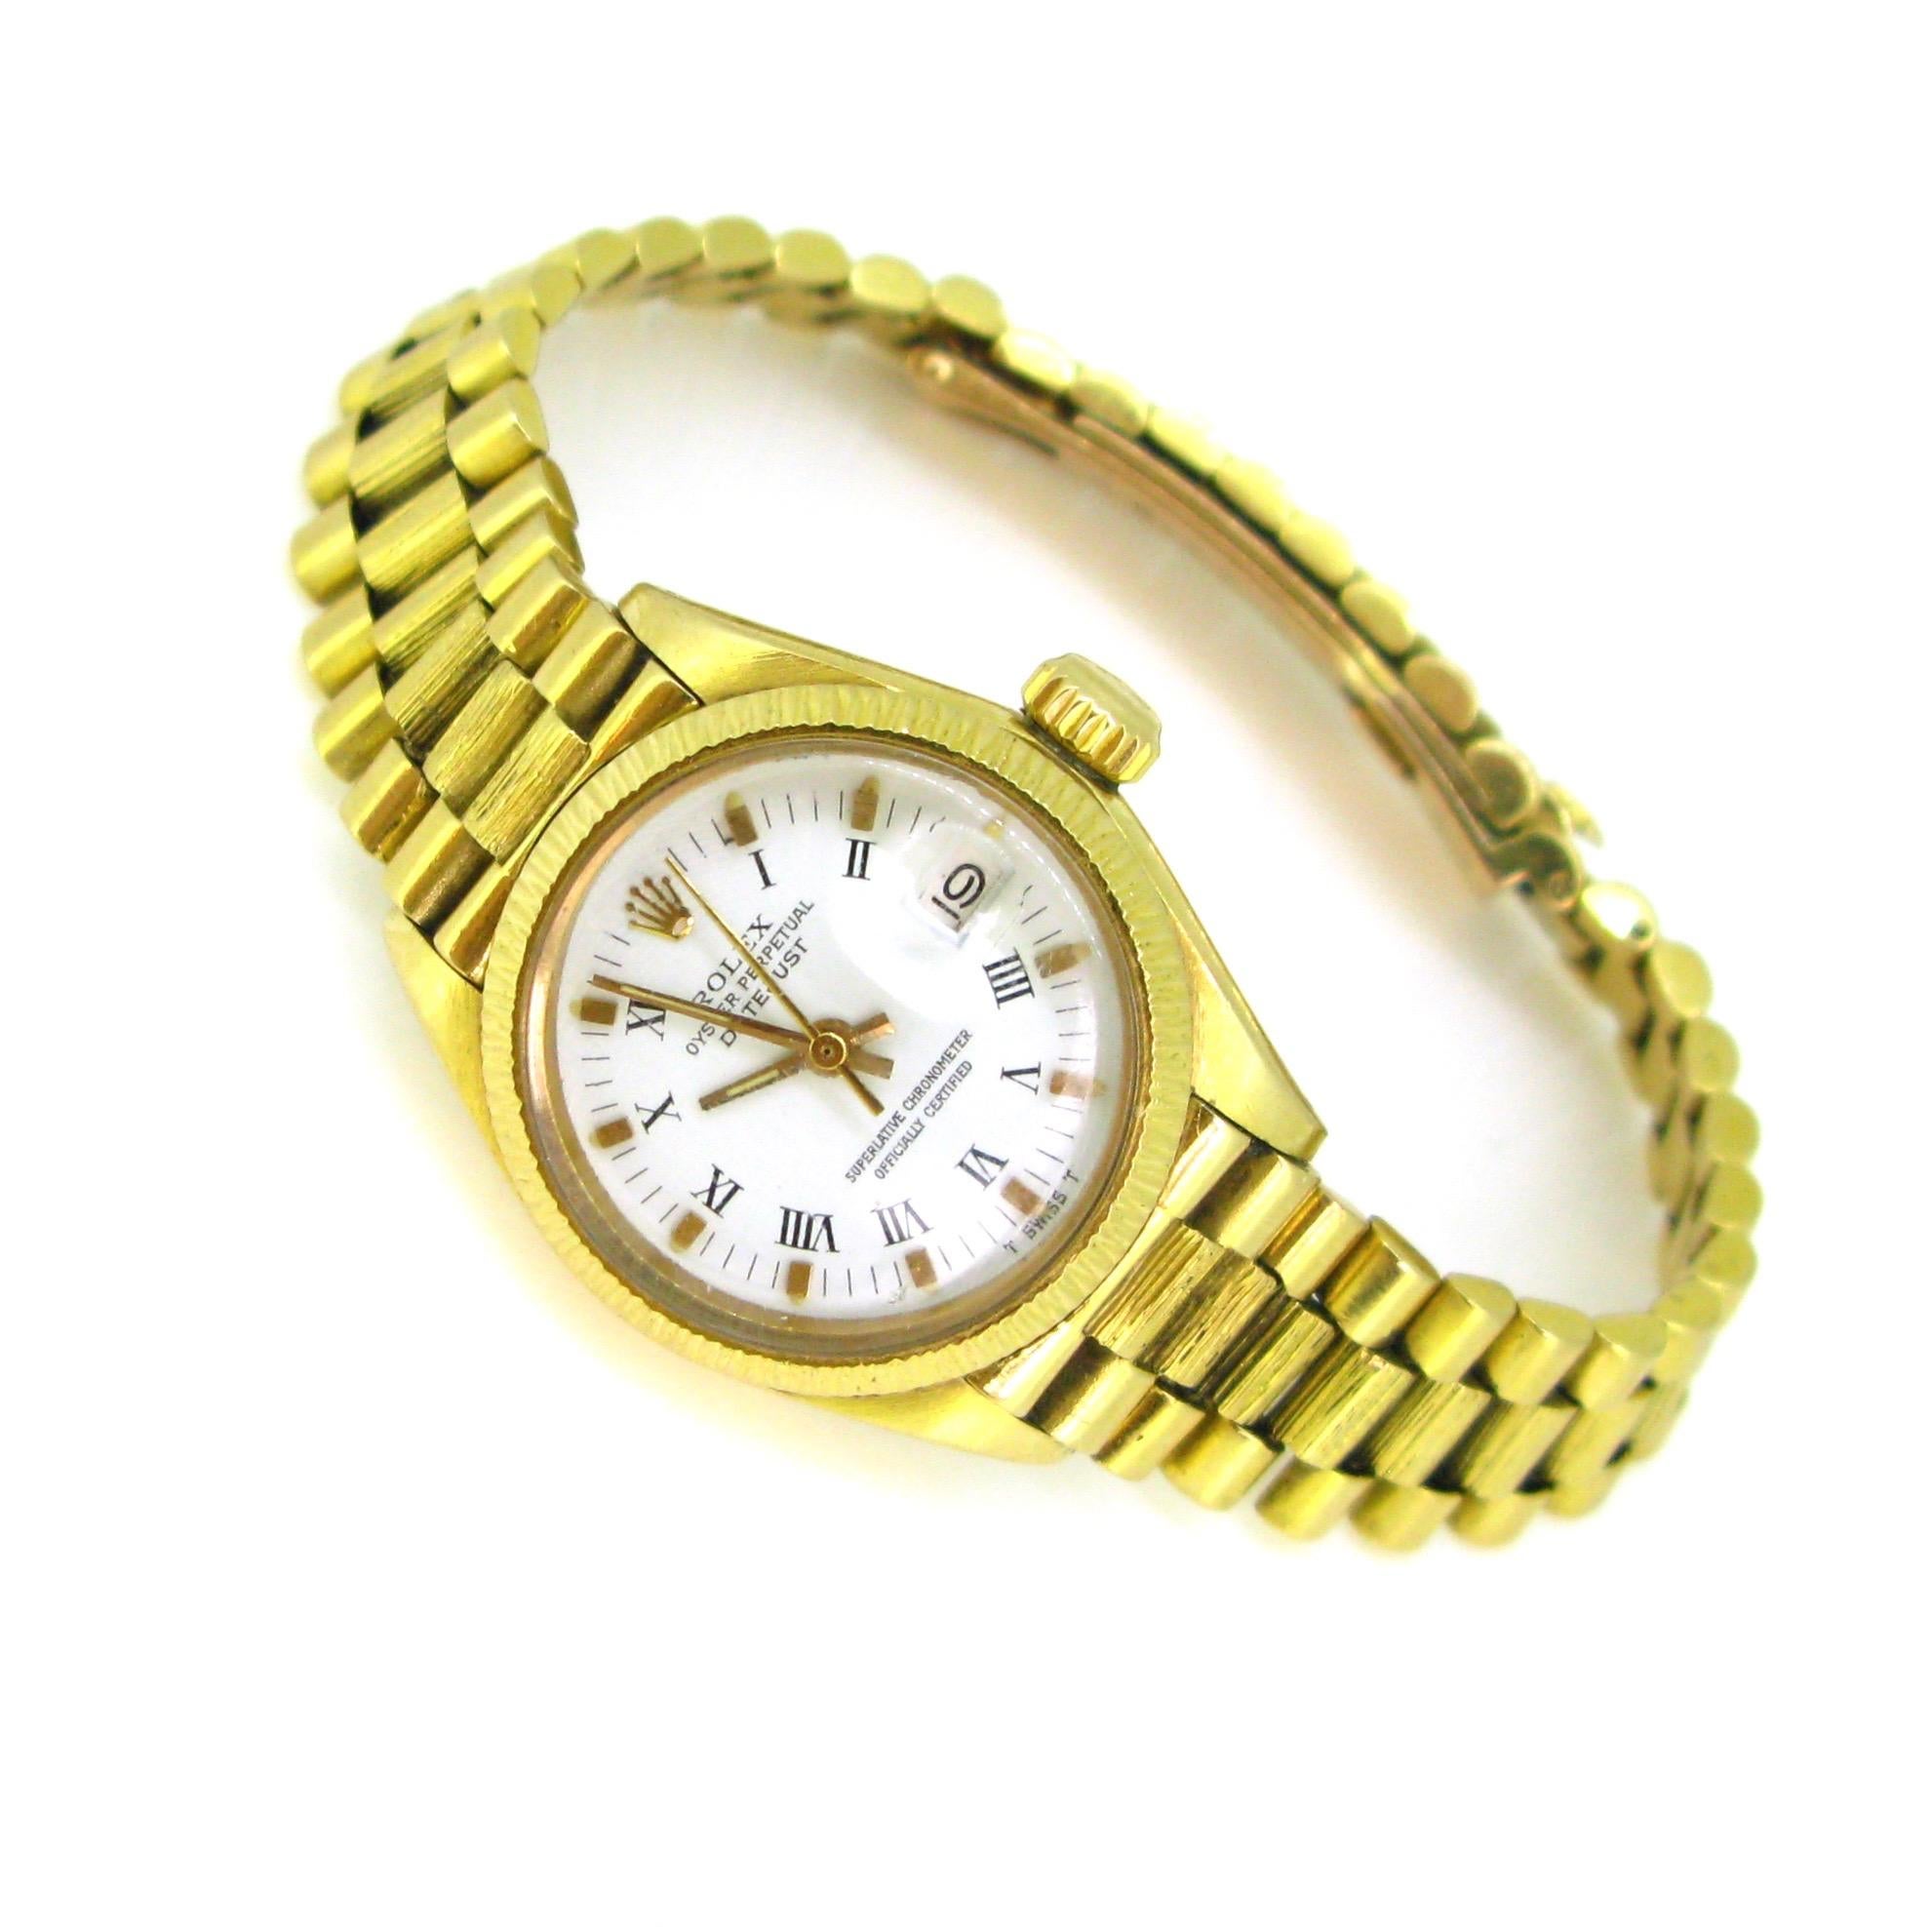 This Rolex Oyster Datejust 6927 watch is fully made in 18K yellow gold. It is in good condition and works perfectly.

Total Weight:	63.6 gr

Circa: 1975

Metal:	18K yellow gold

Condition: Good

Movement :	Automatic Rolex 2030

Signature:	Rolex